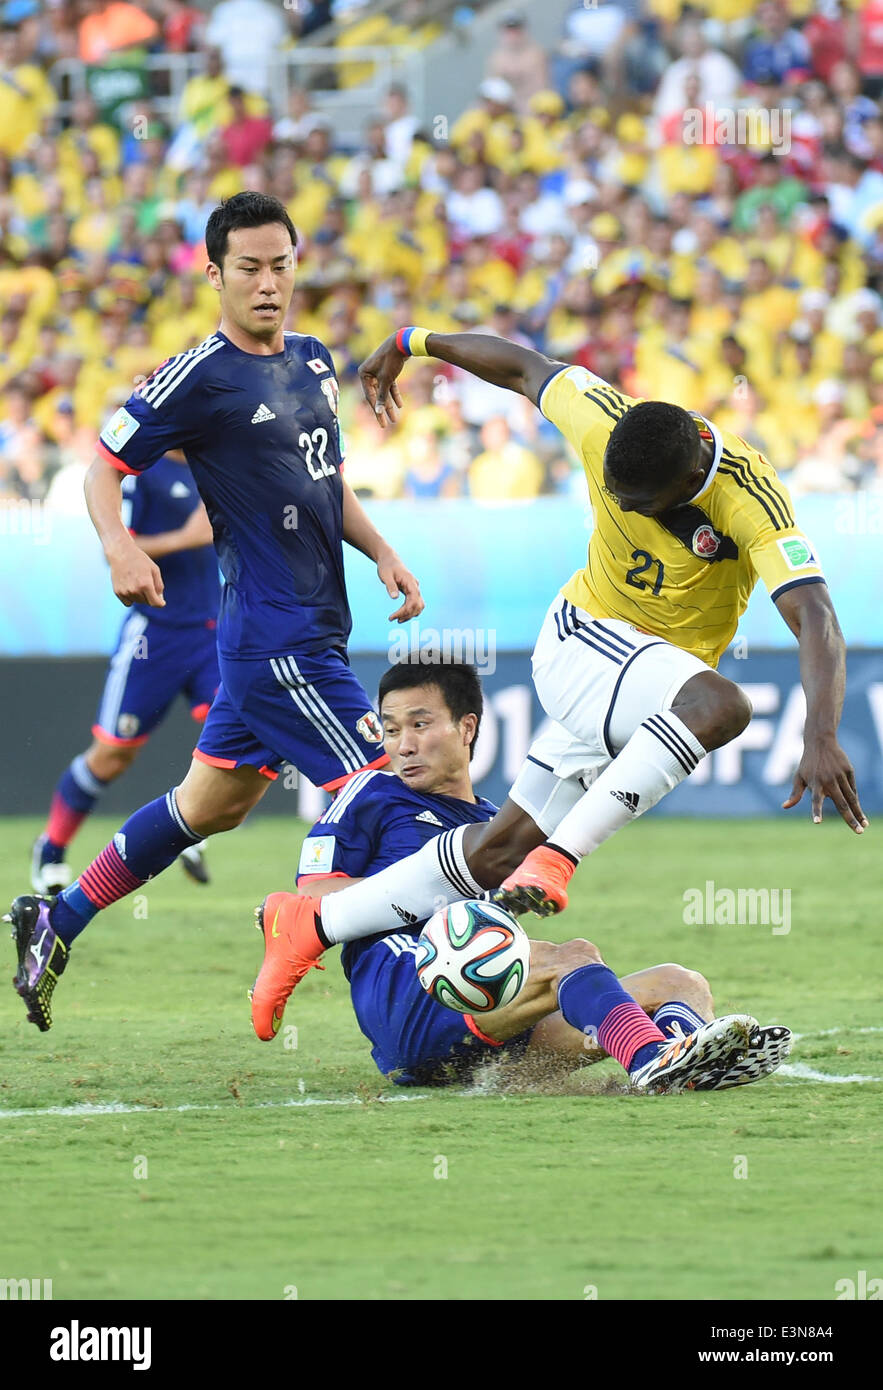 Cuiaba, Brazil. 24th June, 2014. Colombia's Jackson Martinez (R) vies for the ball during a Group C match between Japan and Colombia of 2014 FIFA World Cup at the Arena Pantanal Stadium in Cuiaba, Brazil, June 24, 2014. © Liu Dawei/Xinhua/Alamy Live News Stock Photo